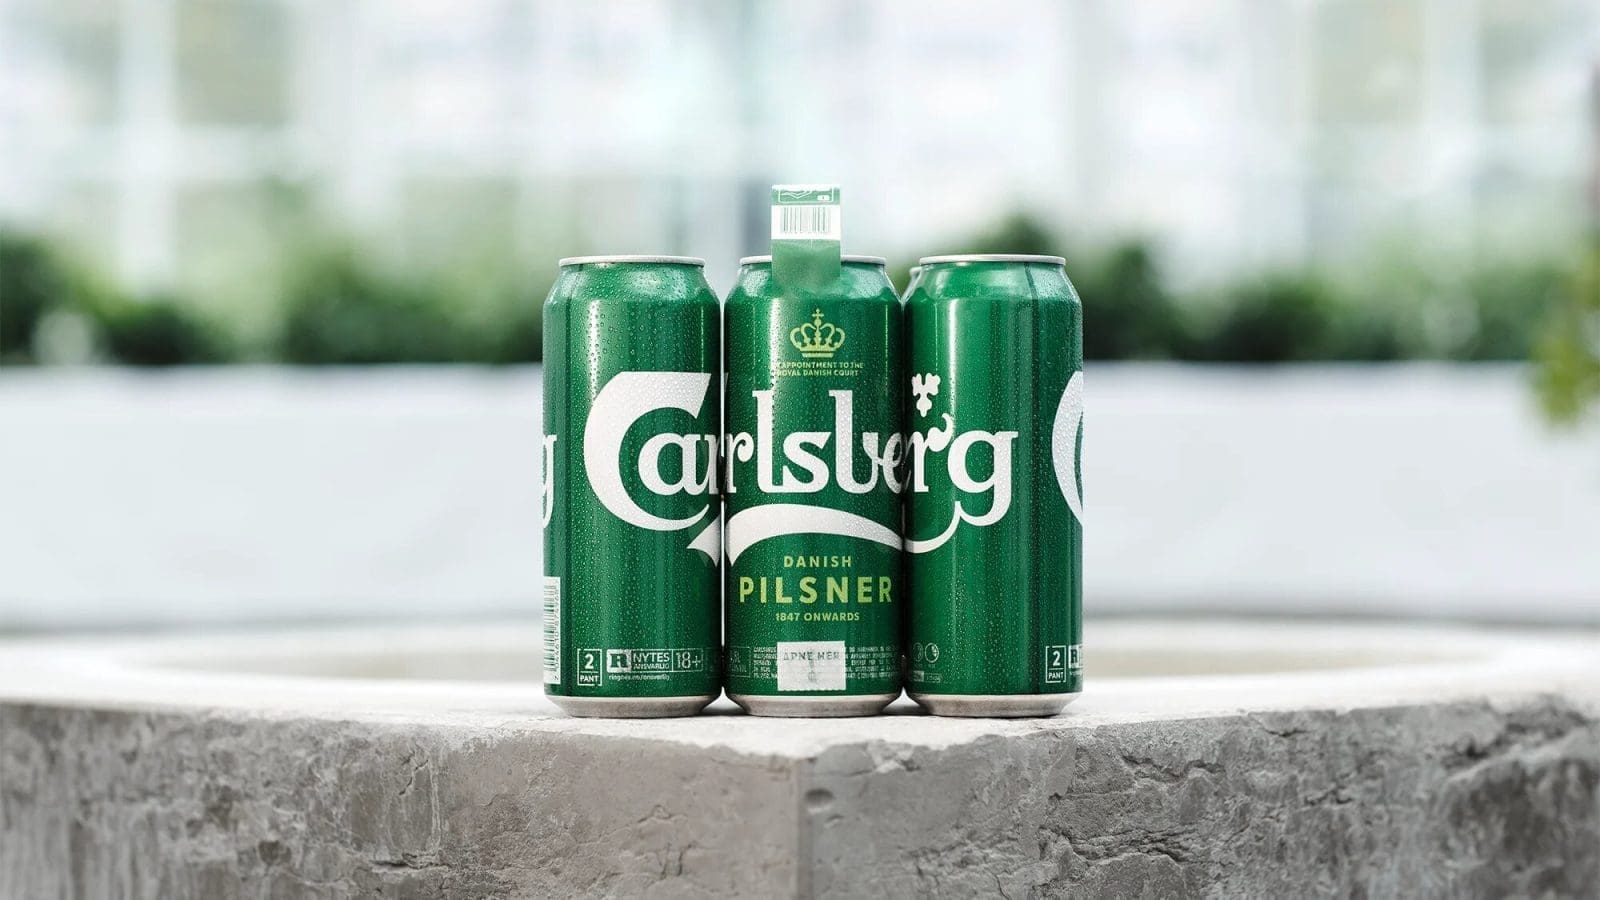 Carlsberg Marstons invests in new KHS technology to cut water and plastic consumption